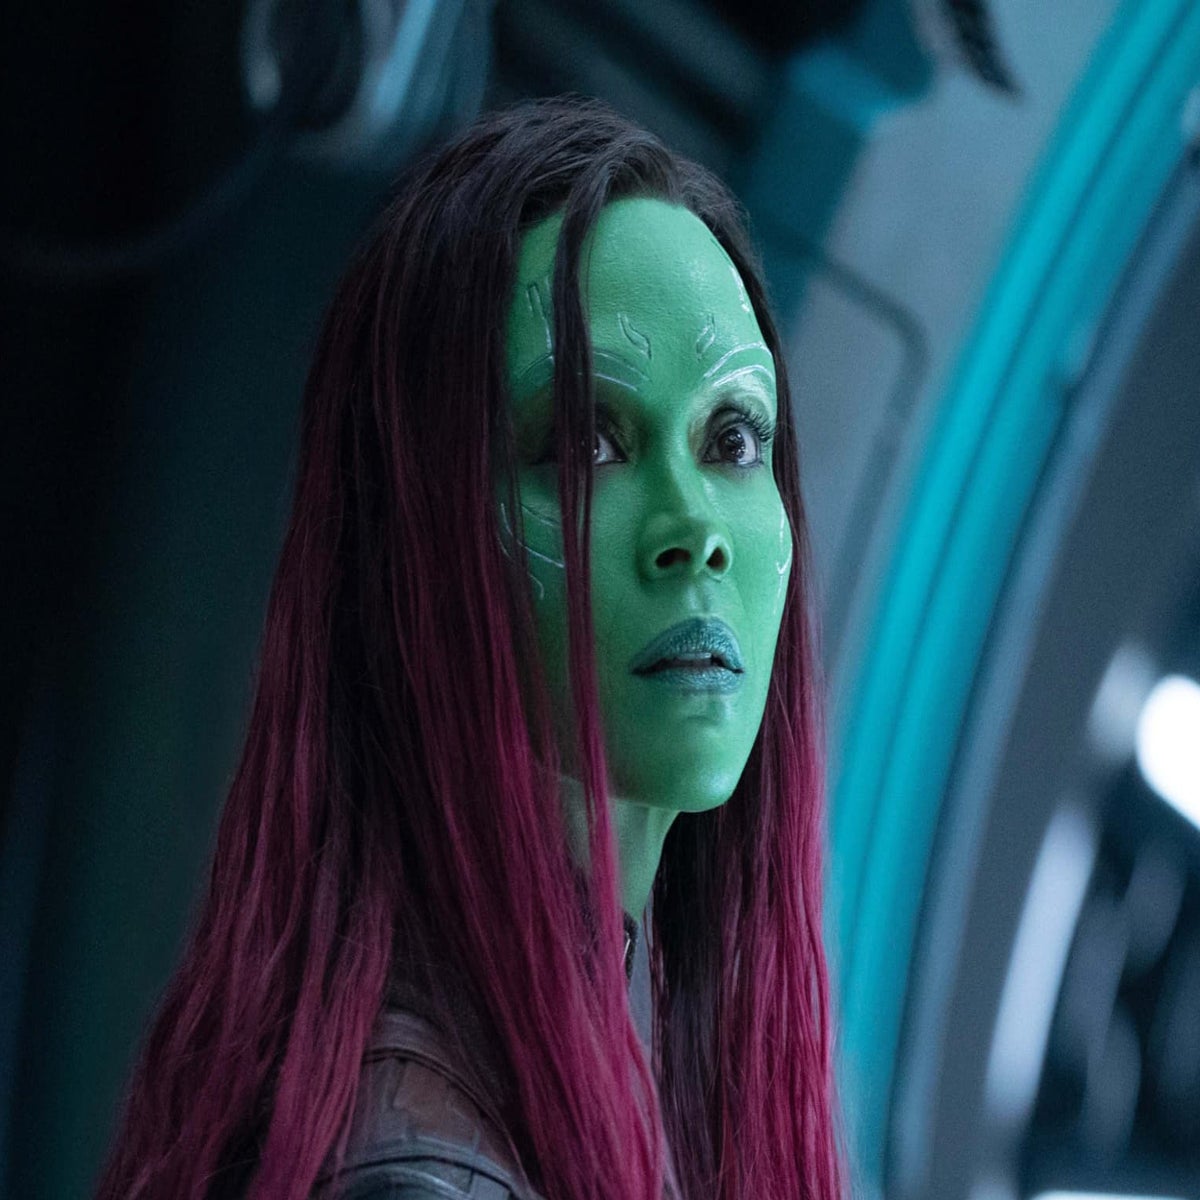 Guardians of the Galaxy age rating: Vol 3's 'disturbing' and 'graphic'  scenes spark questions over age rating